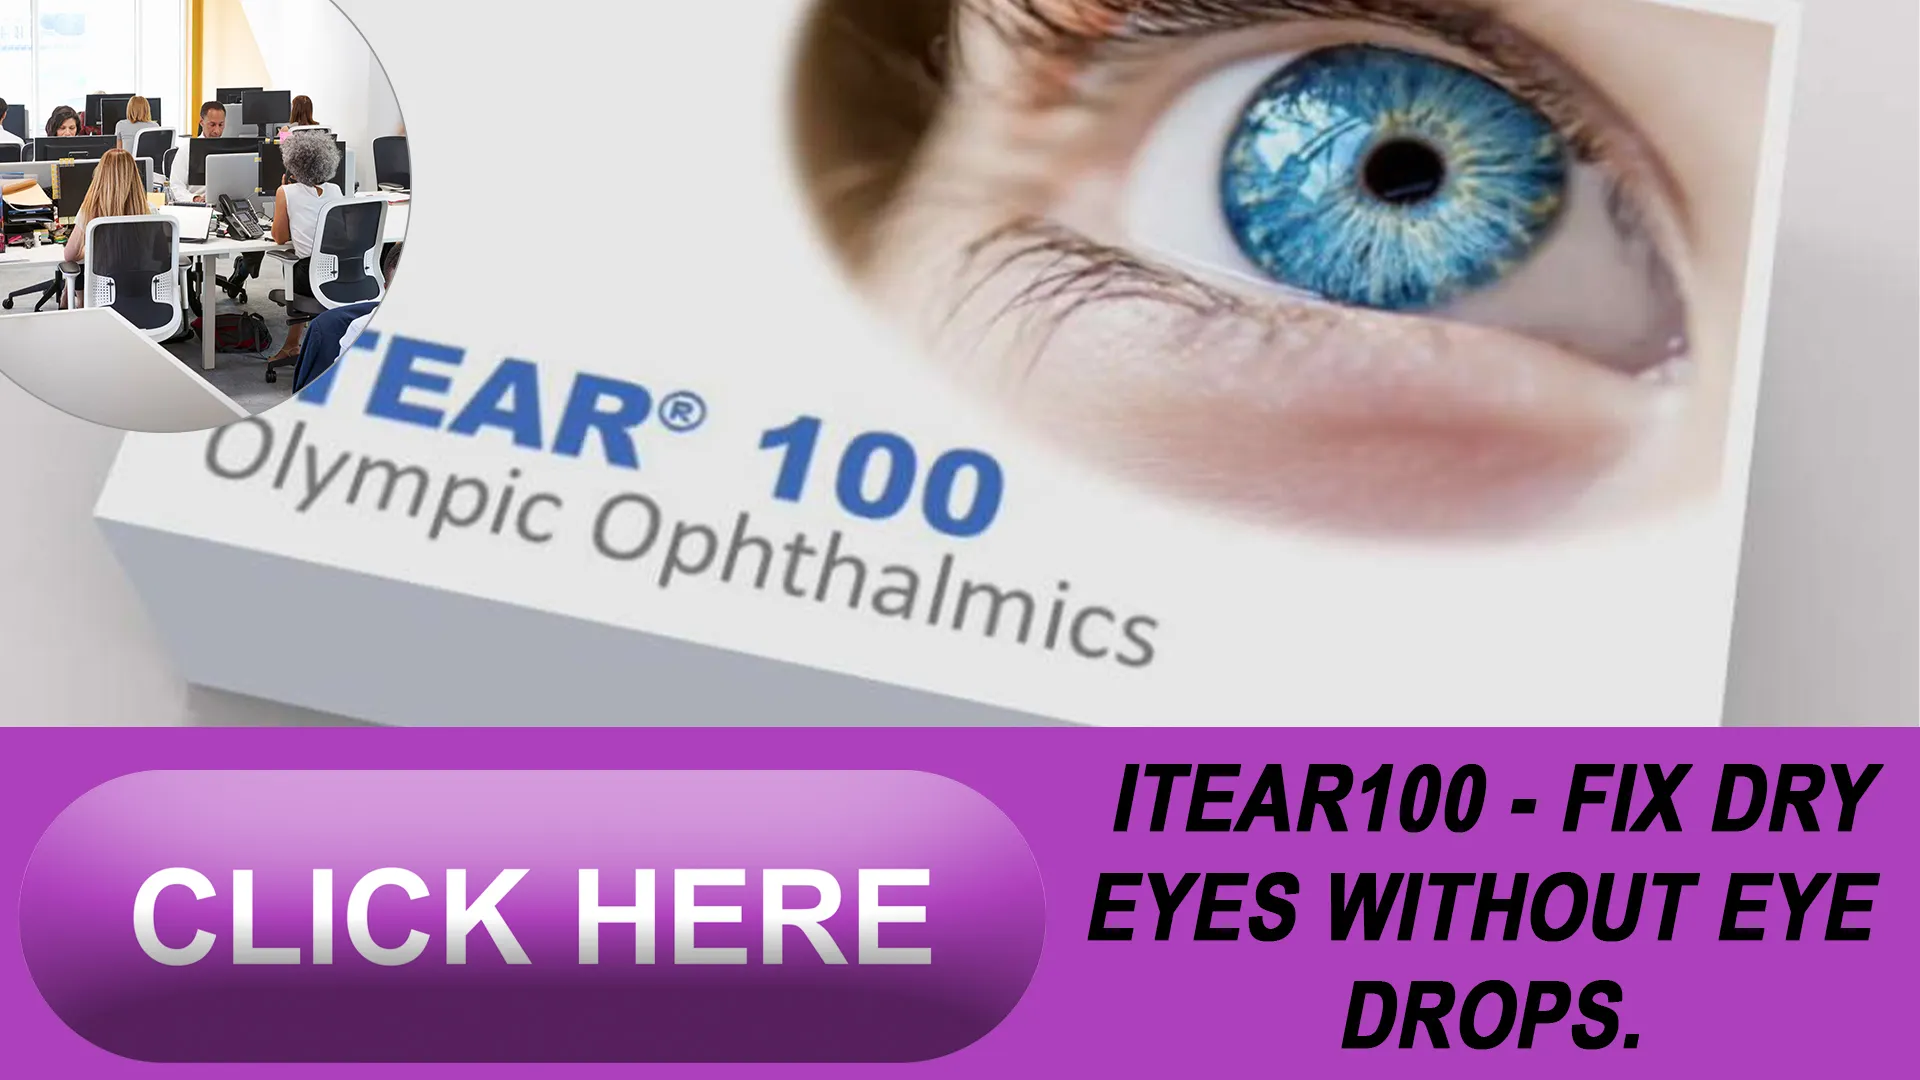 Olympic Ophthalmics



